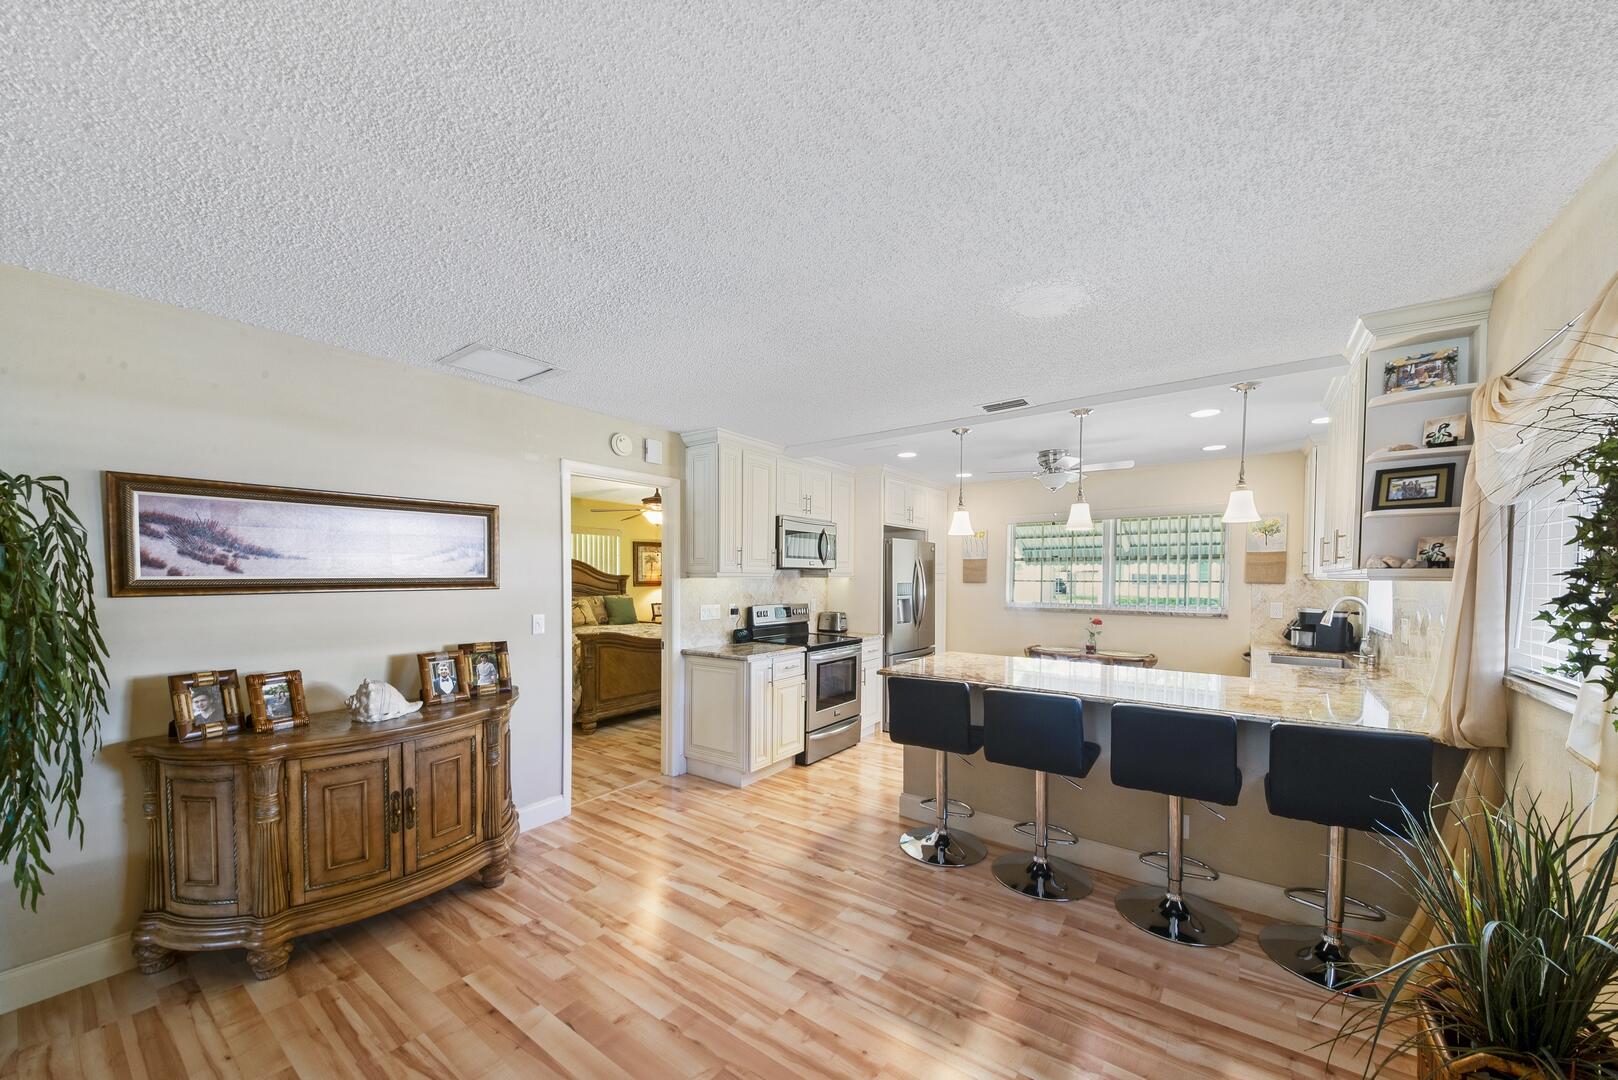 a large living room with stainless steel appliances kitchen island granite countertop furniture and a wooden floor